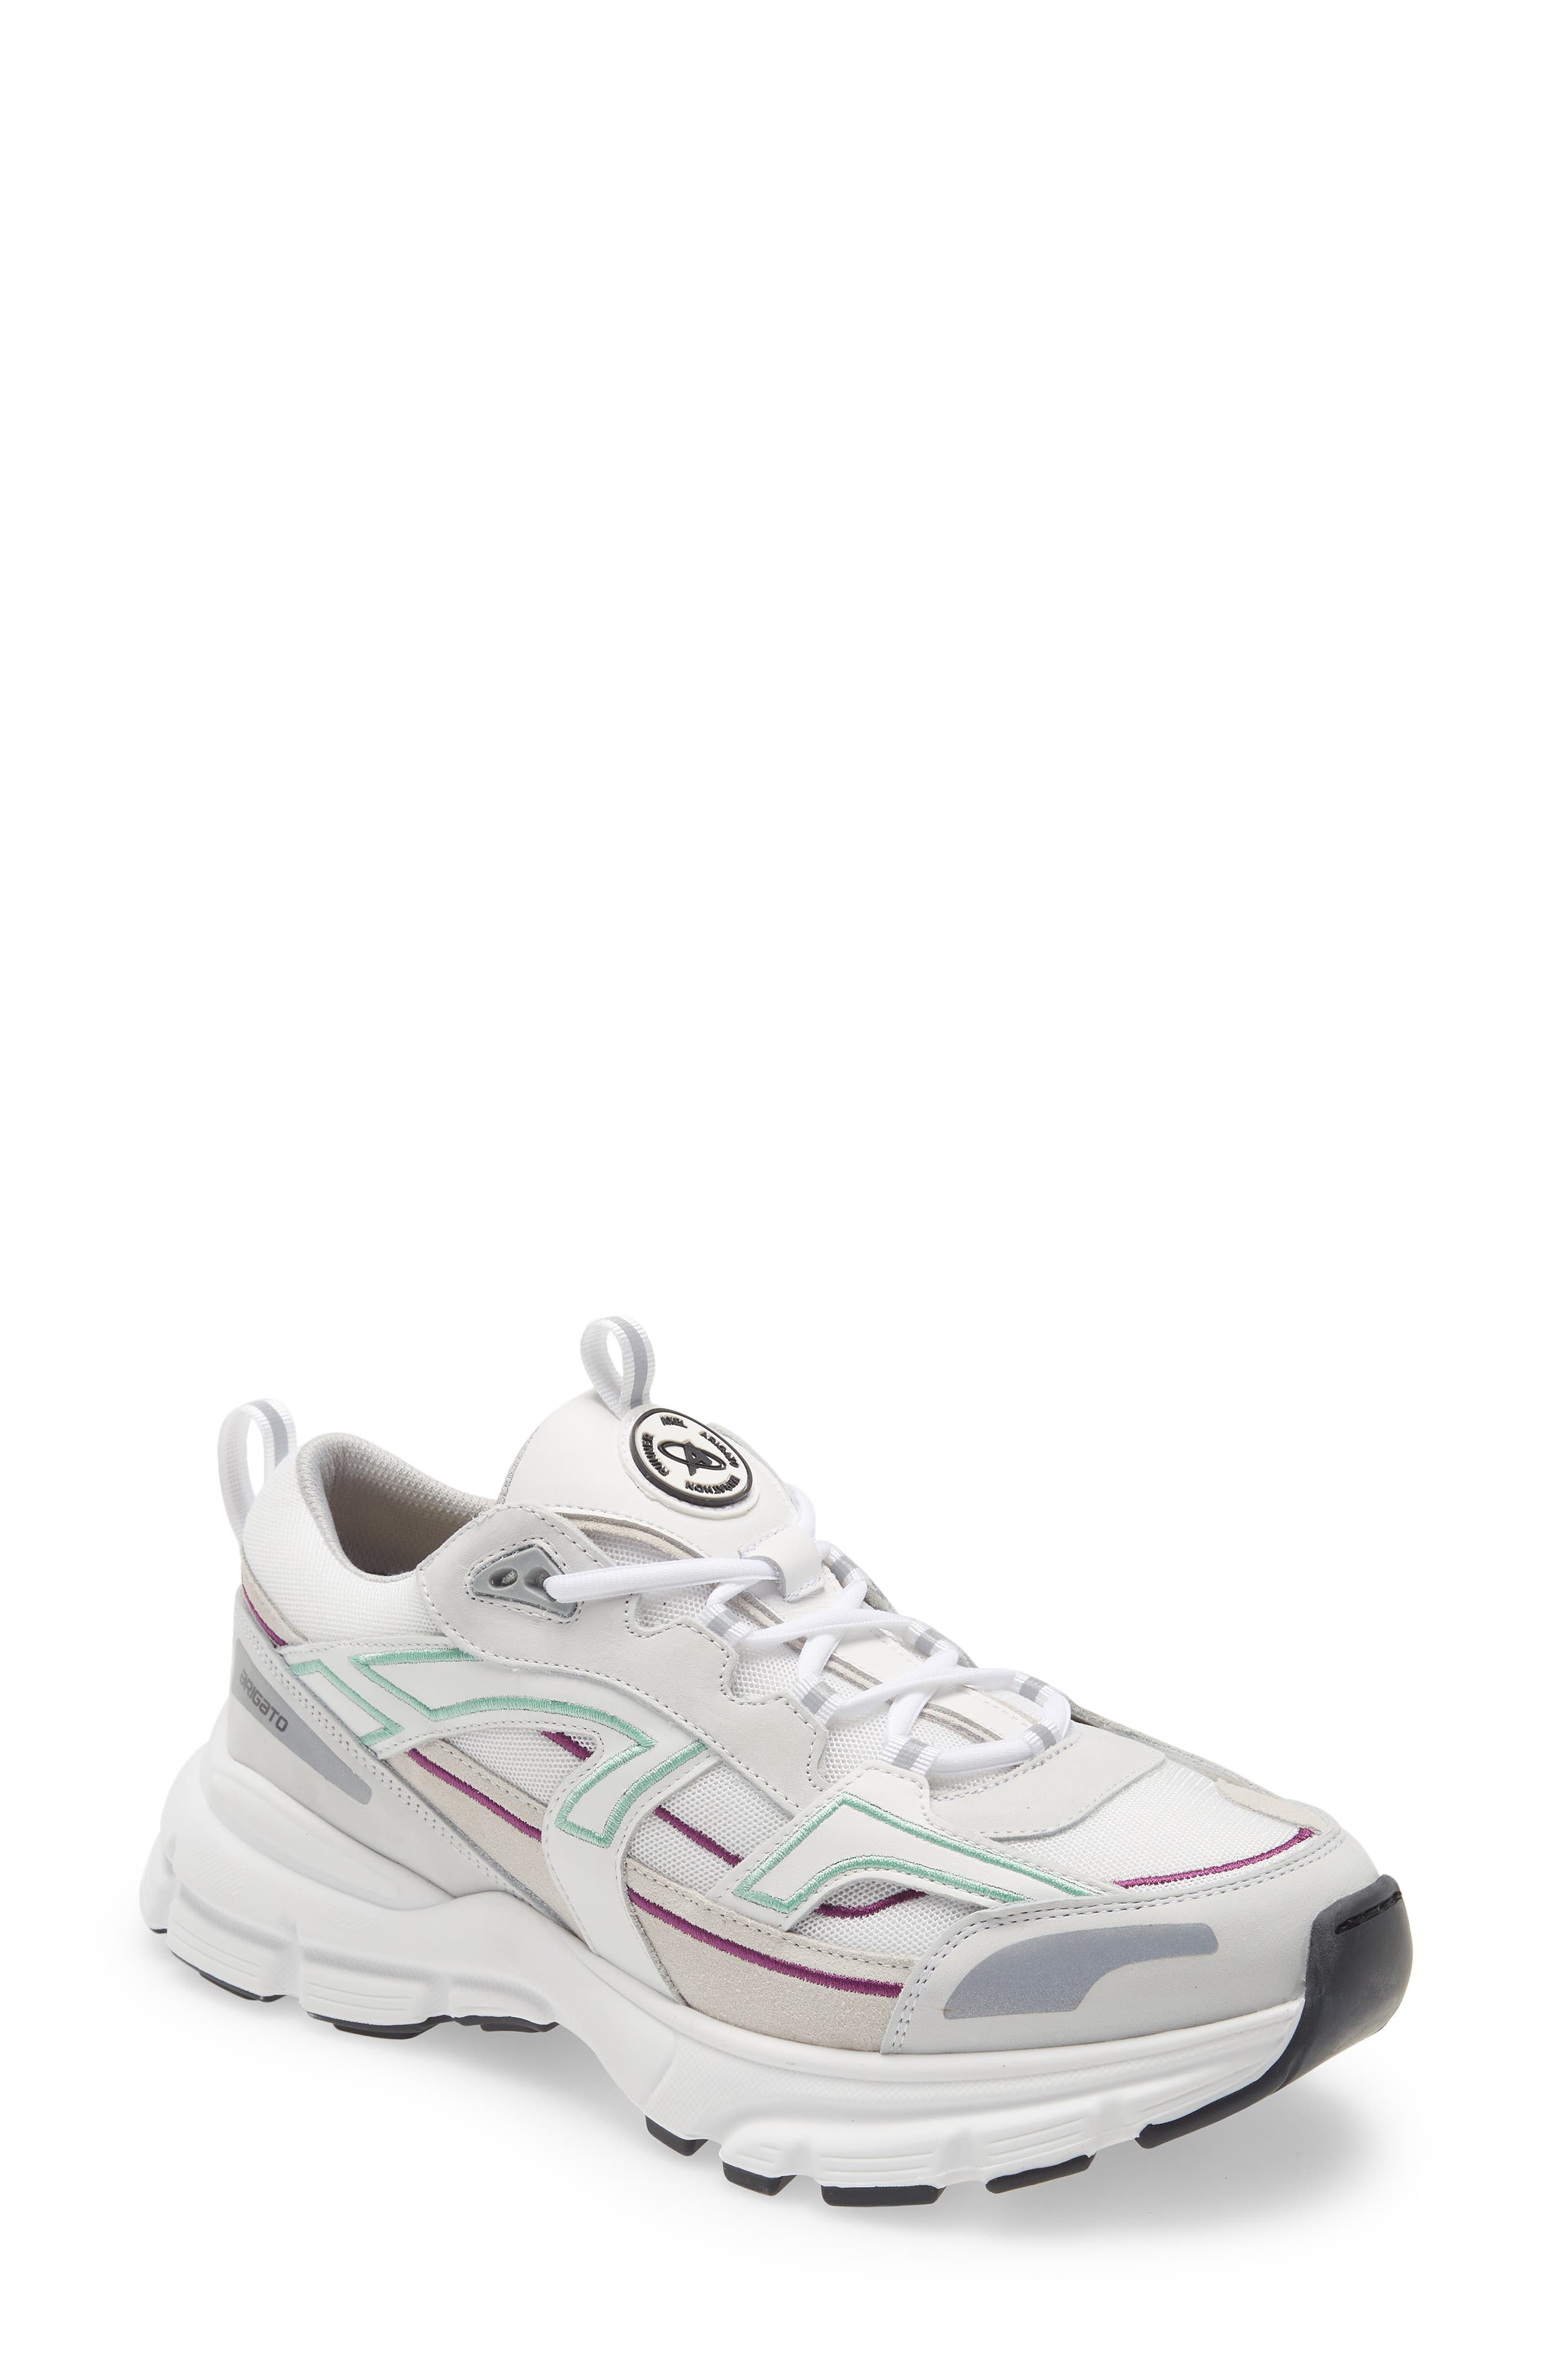 Axel Arigato Marathon R-Trail Sneaker in White/Mint at Nordstrom, Size 10Us